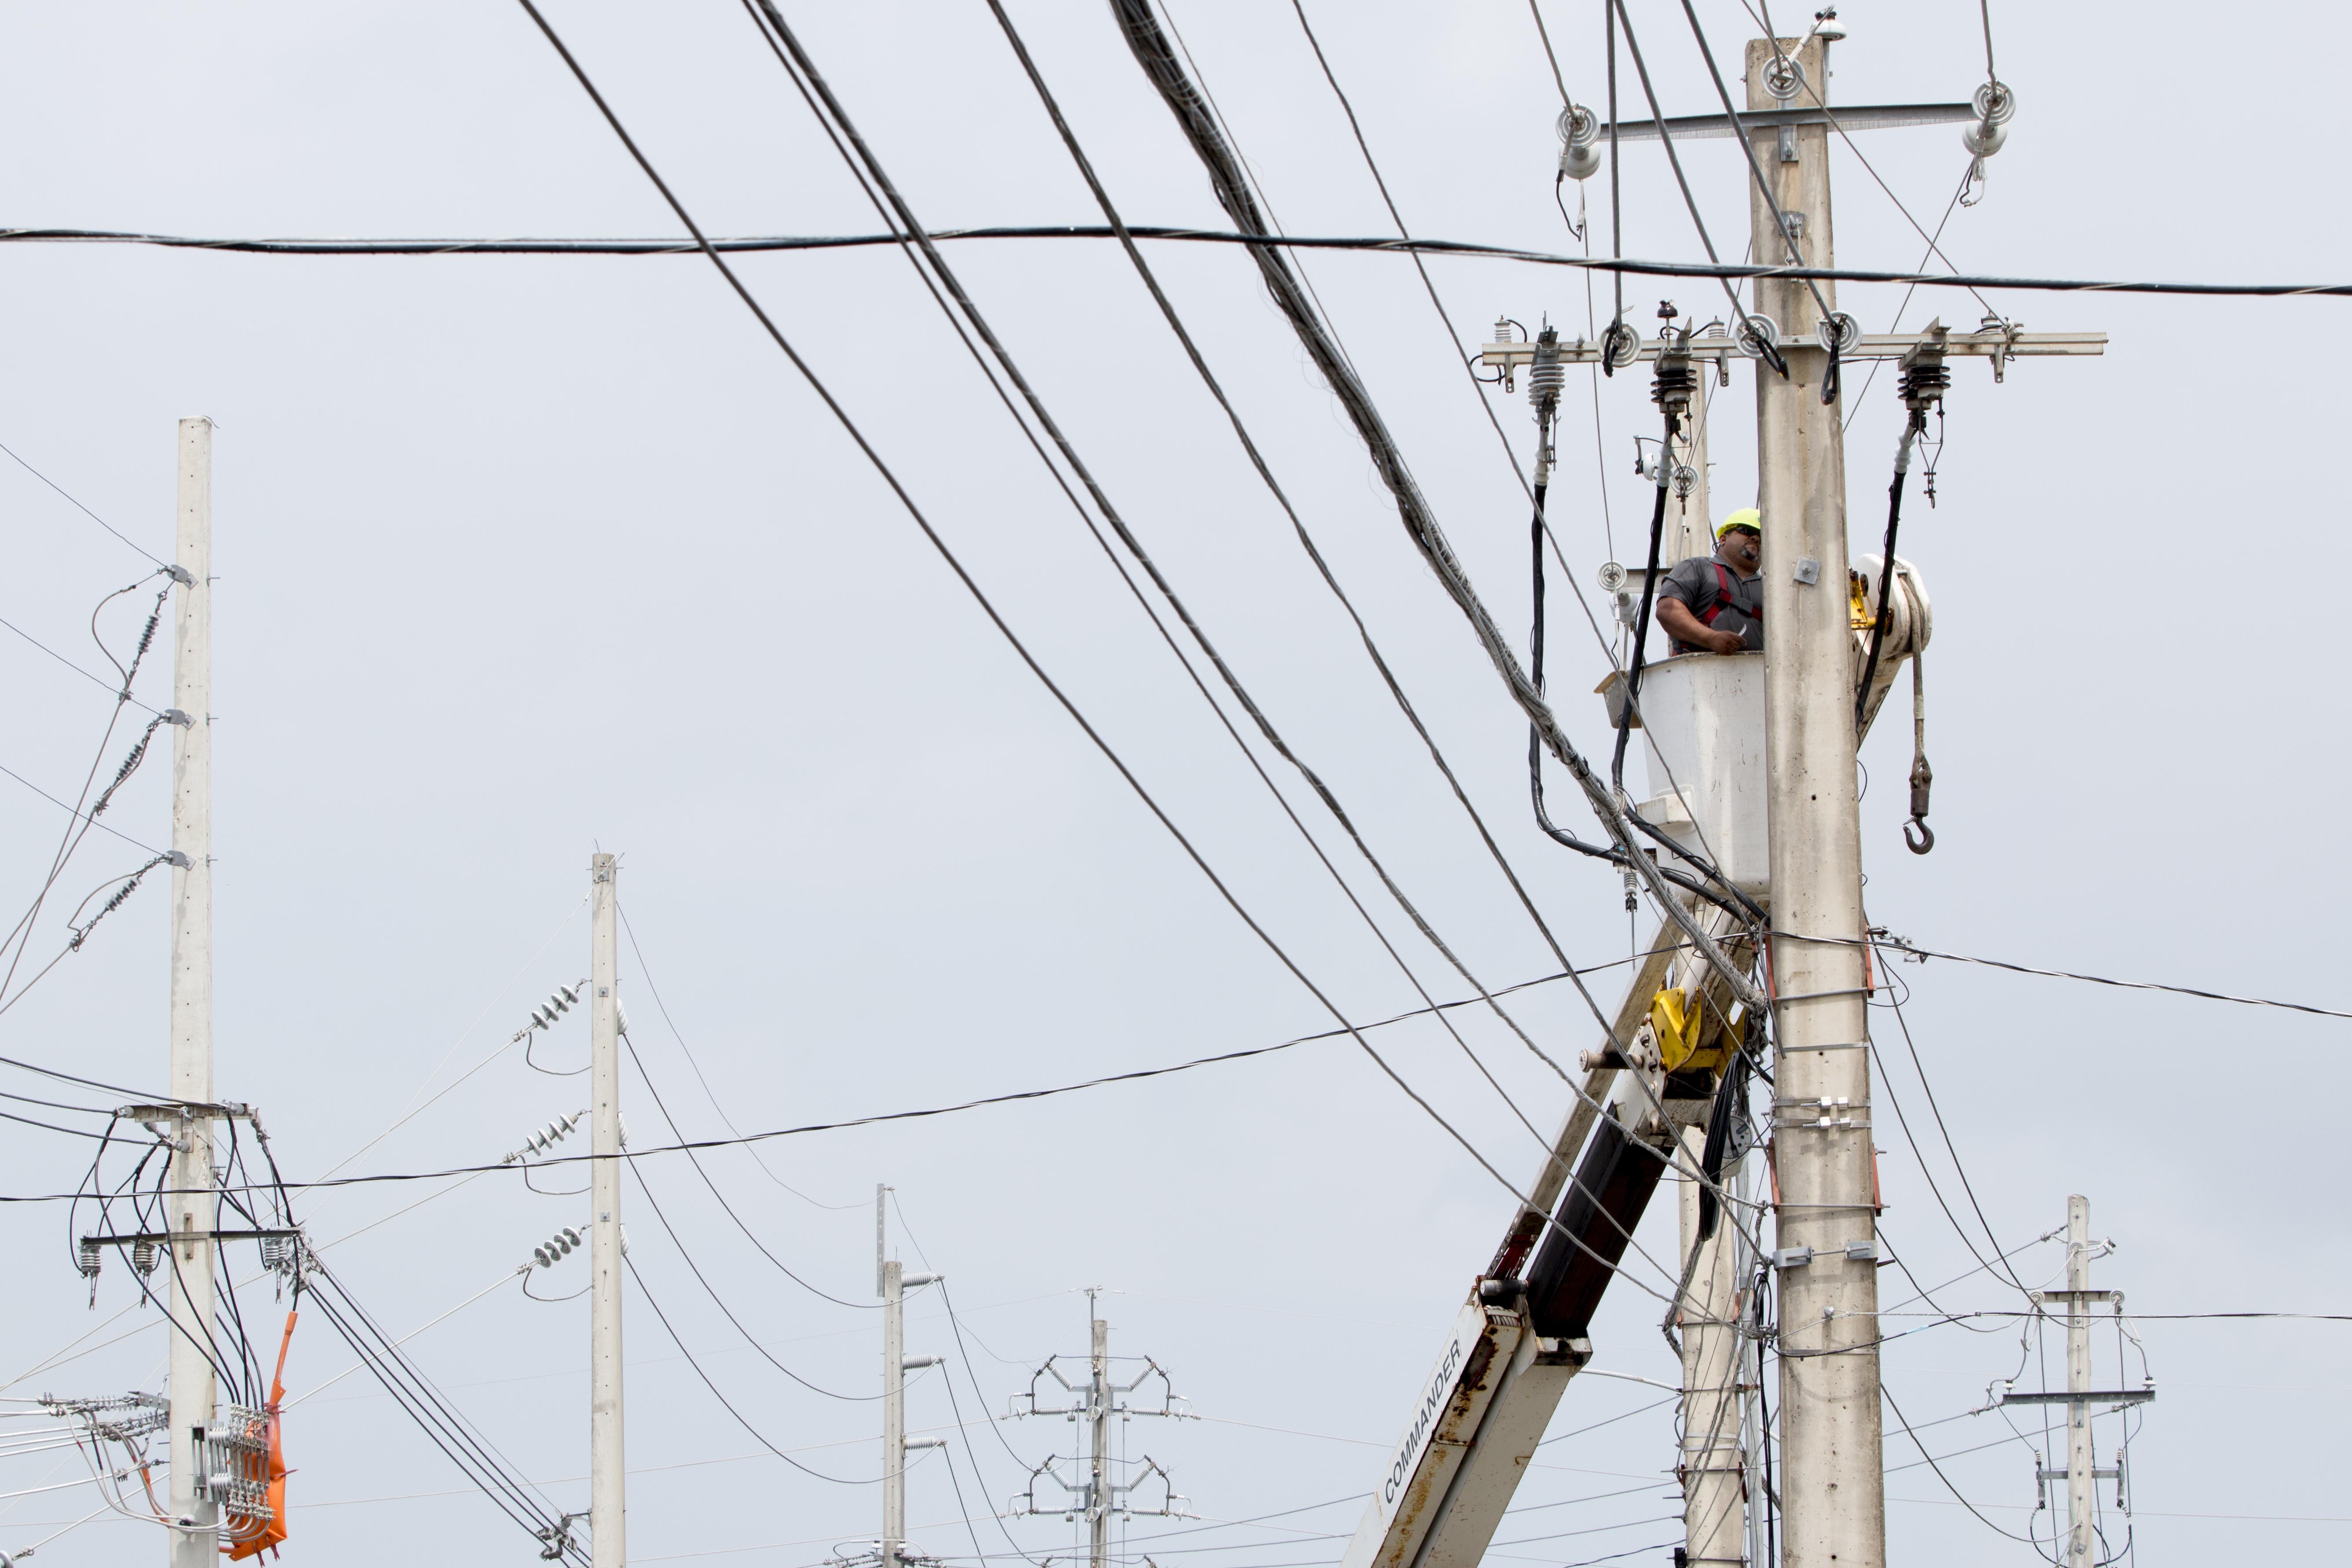 An employee of the Puerto Rico Electric Power Authority repairs a power line damaged by Hurricane Maria.